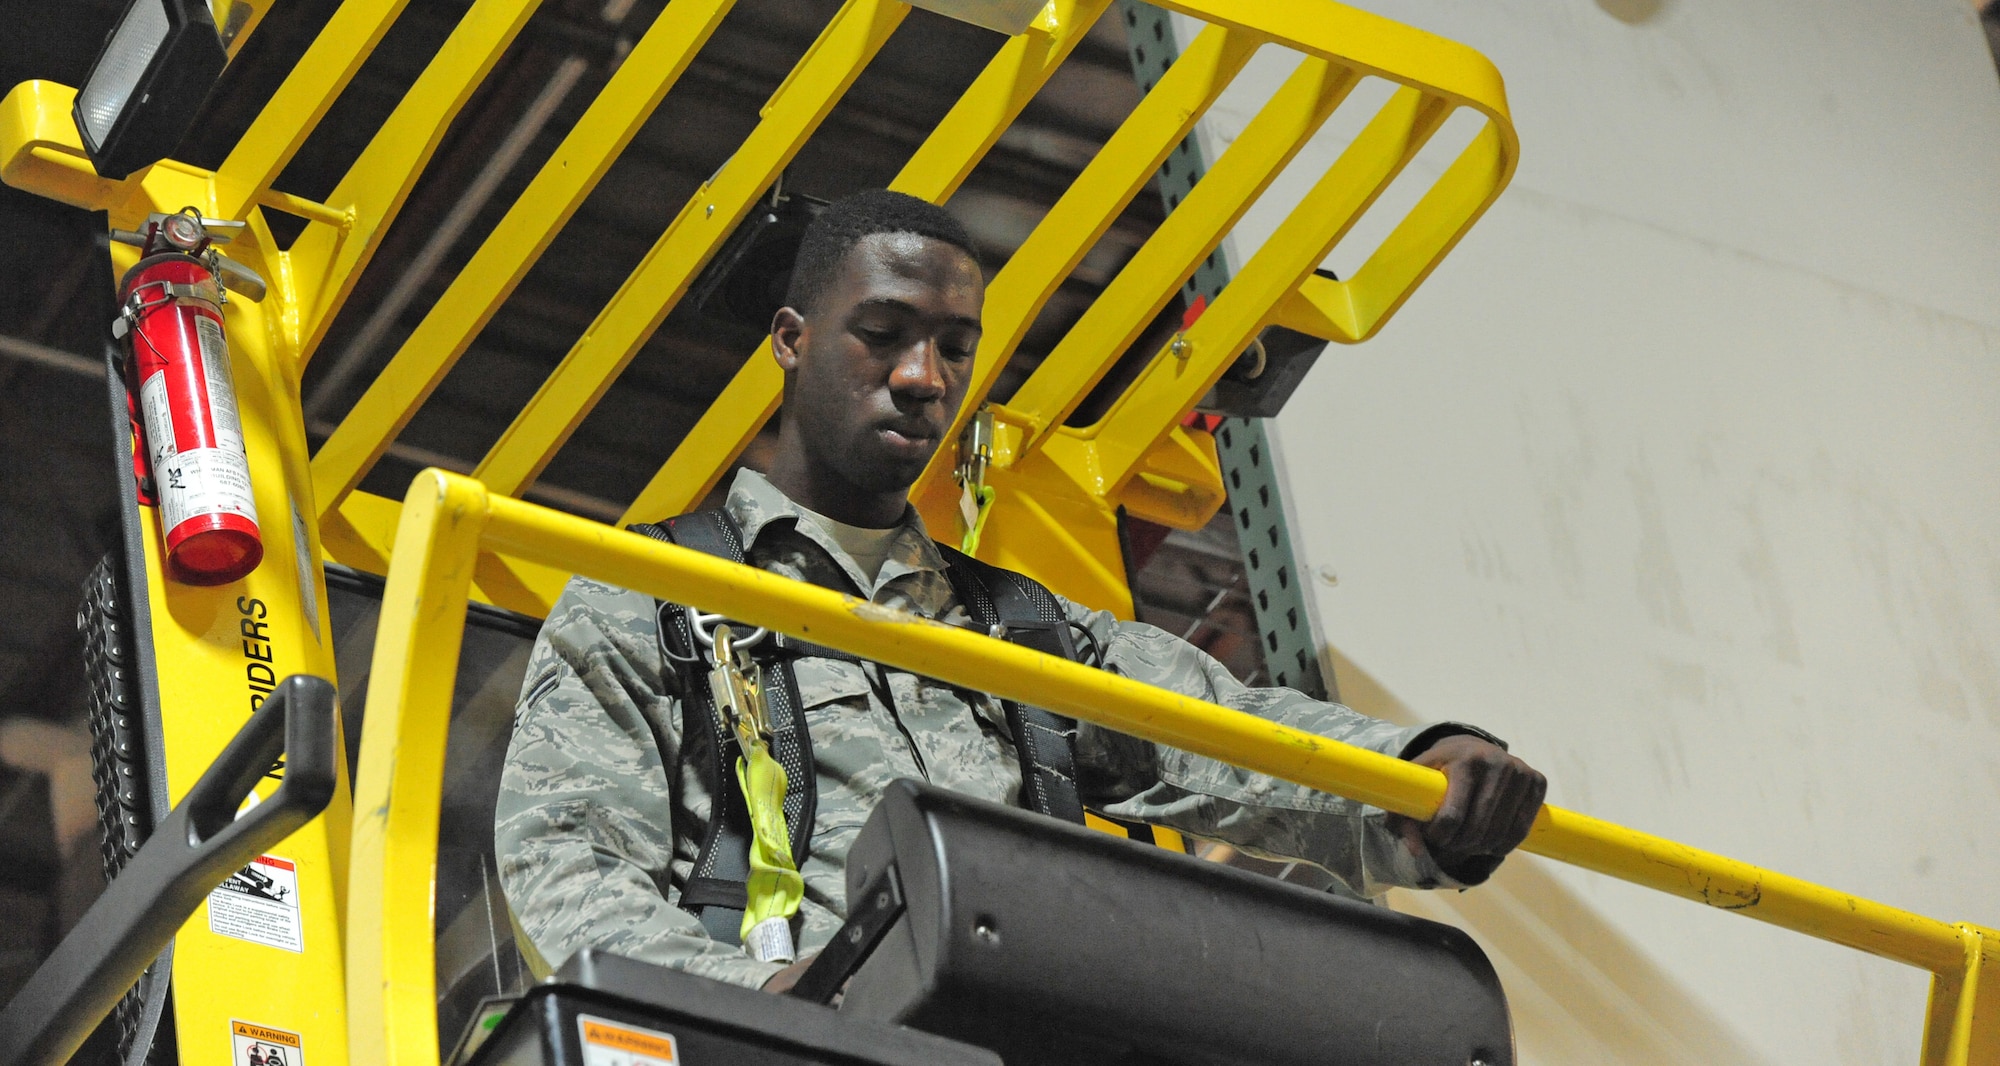 Airman 1st Class Terrell Grant, 509th Logistics Readiness Squadron central storage journeyman, uses a hyster to pull heavy equipment off of a shelf at the central storage warehouse at Whiteman Air Force Base, Mo., June 25, 2013. Hysters help Airmen lift equipment that weighs up to one ton. (U.S. Air Force photo by Staff Sgt. Nick Wilson/Released)